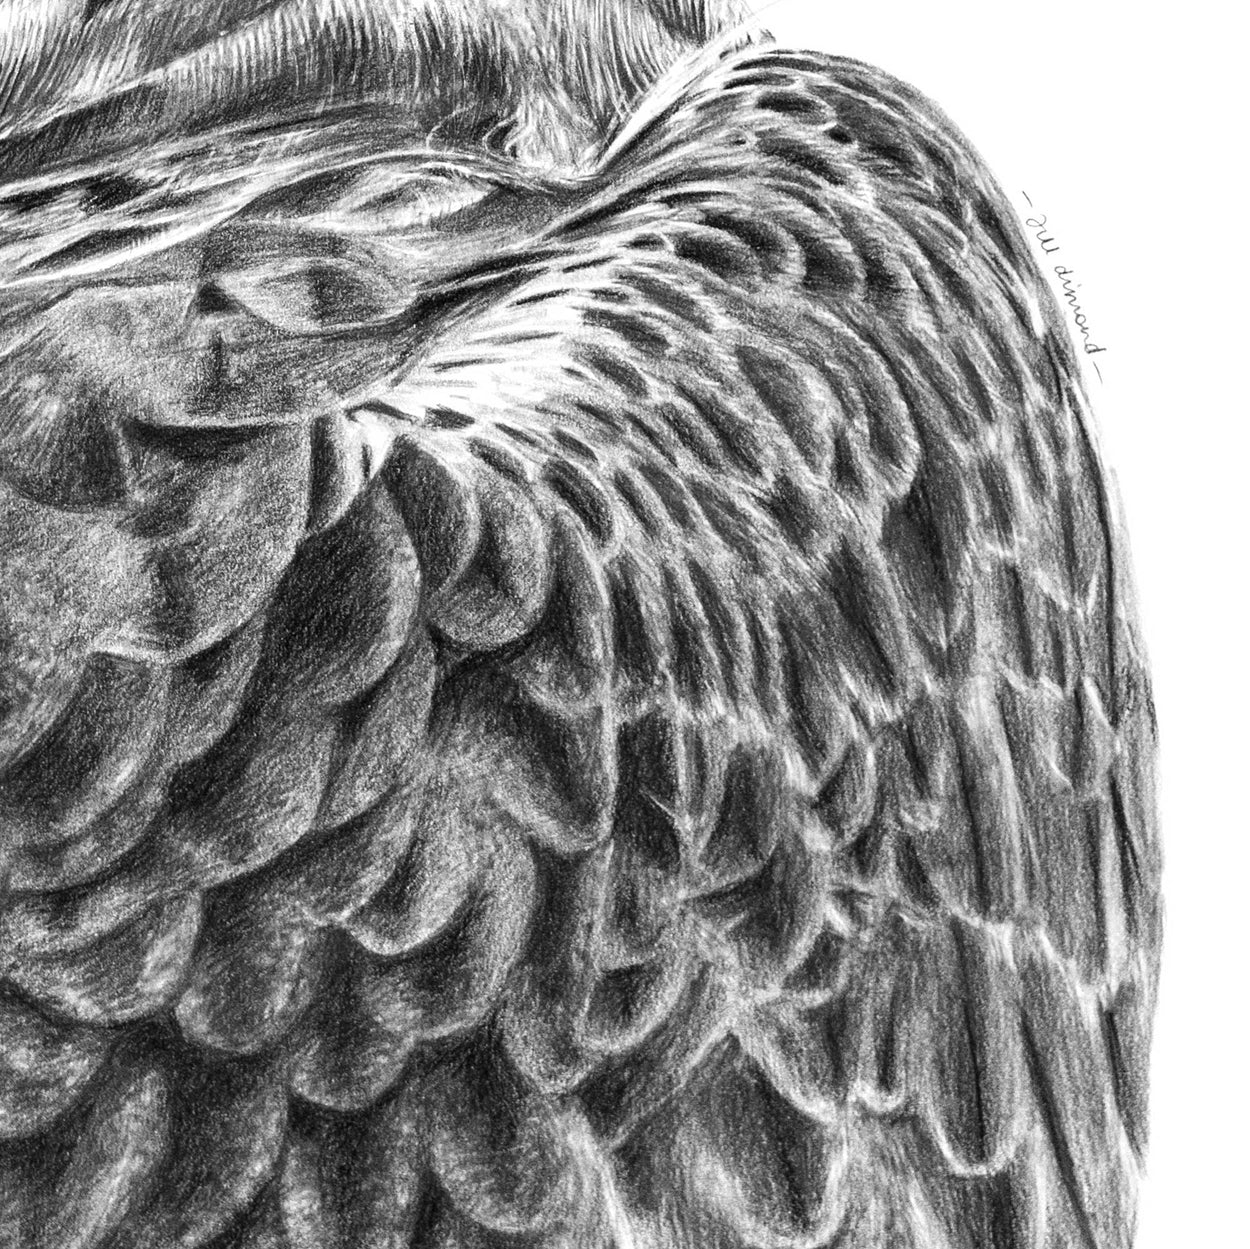 Close-up detail of a pencil drawing of a golden eagle's wing feathers